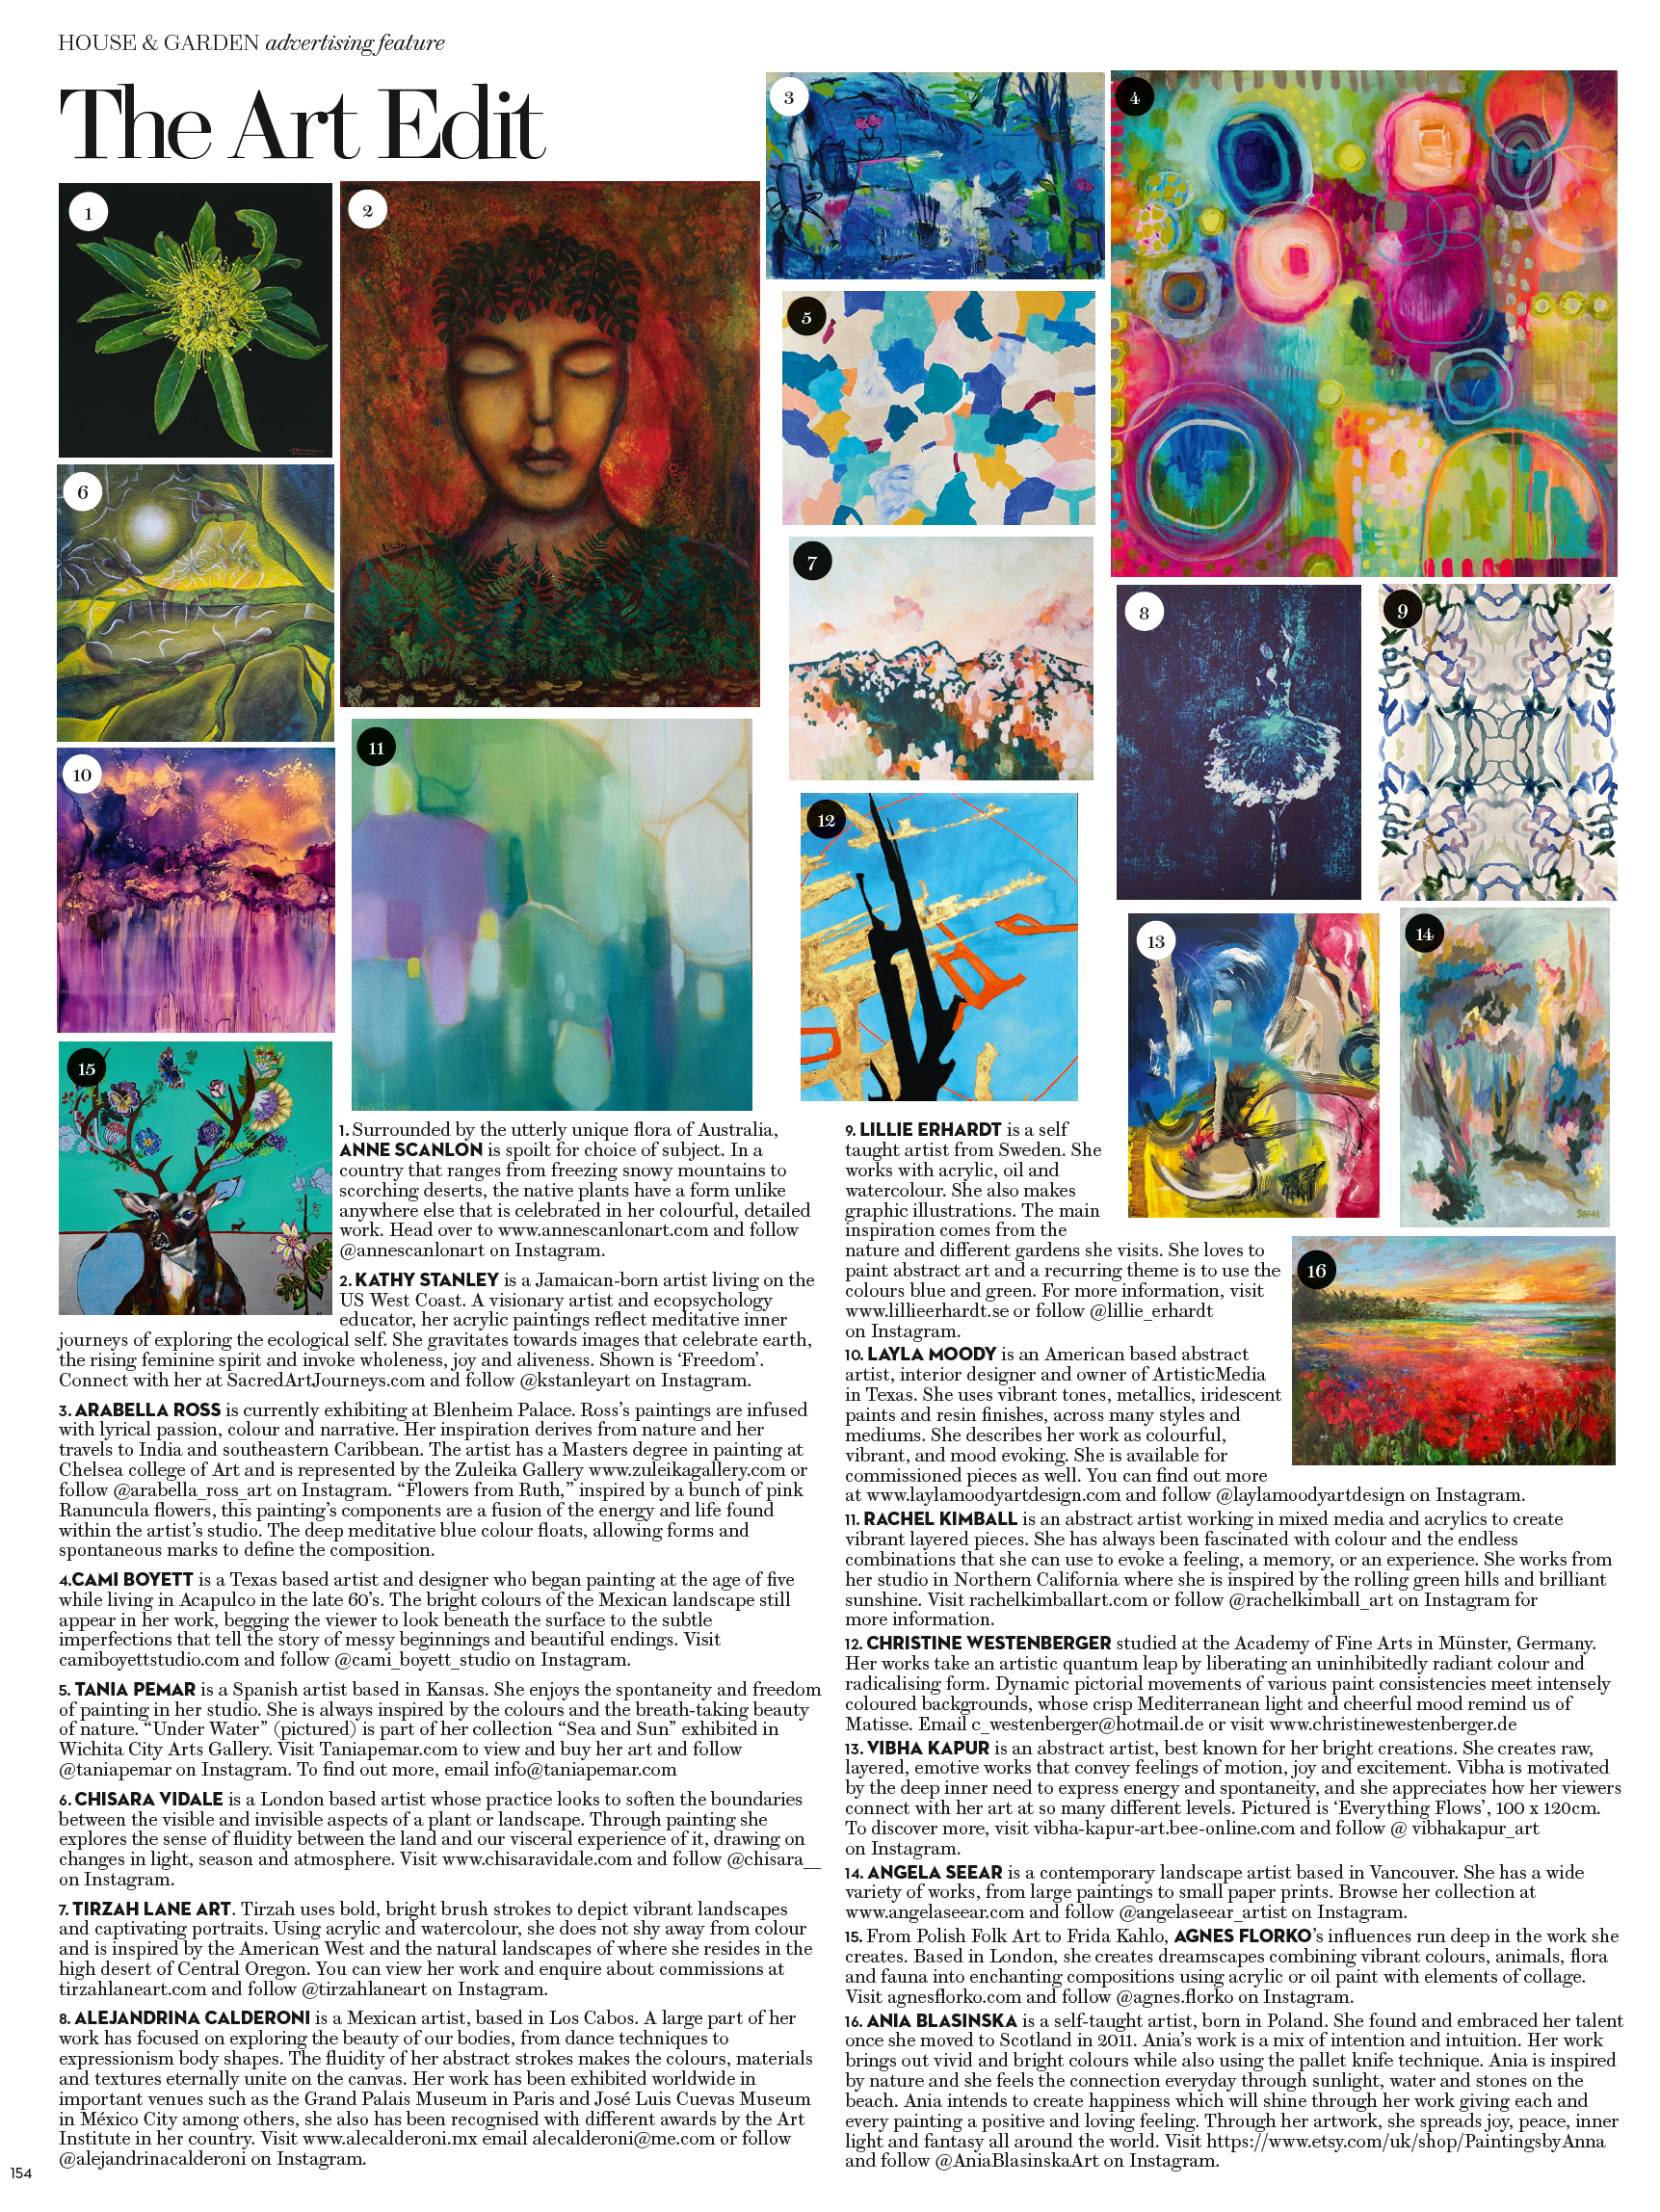 Magazine page featuring art